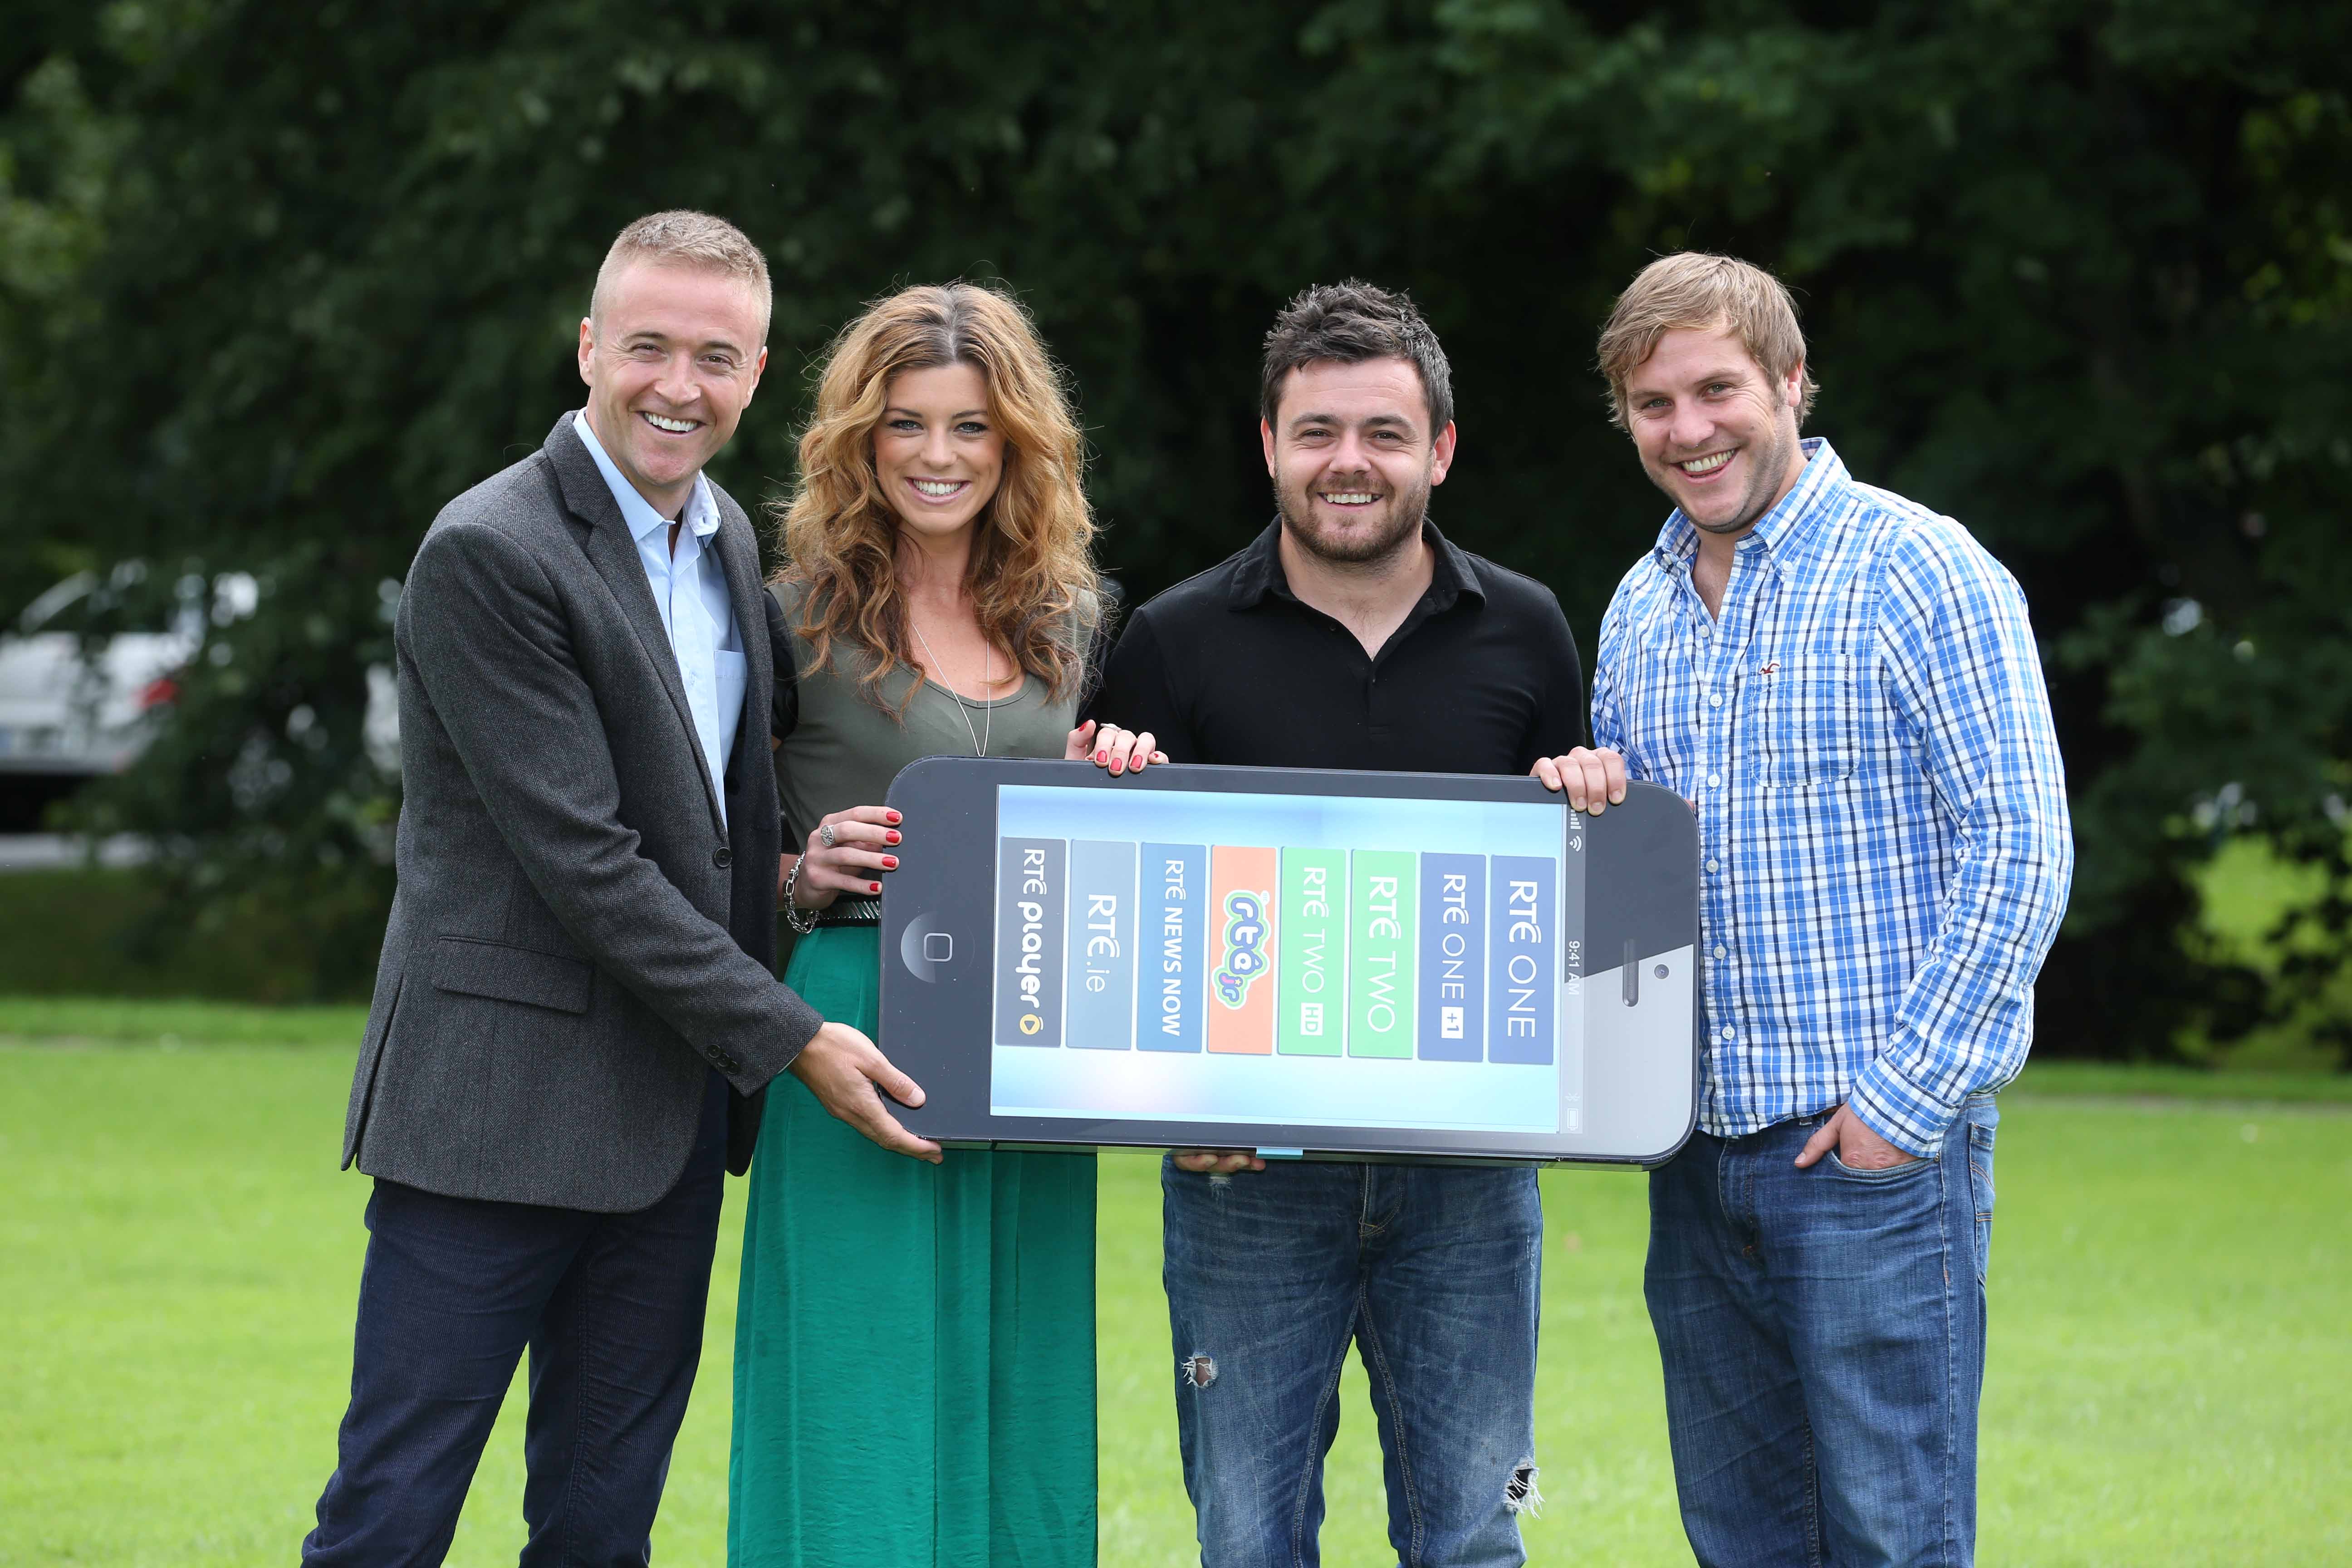 Jason Barry, Aoibhinn McGinnity, Laurence Kinlan and Peter Coonan at the event of Love/Hate